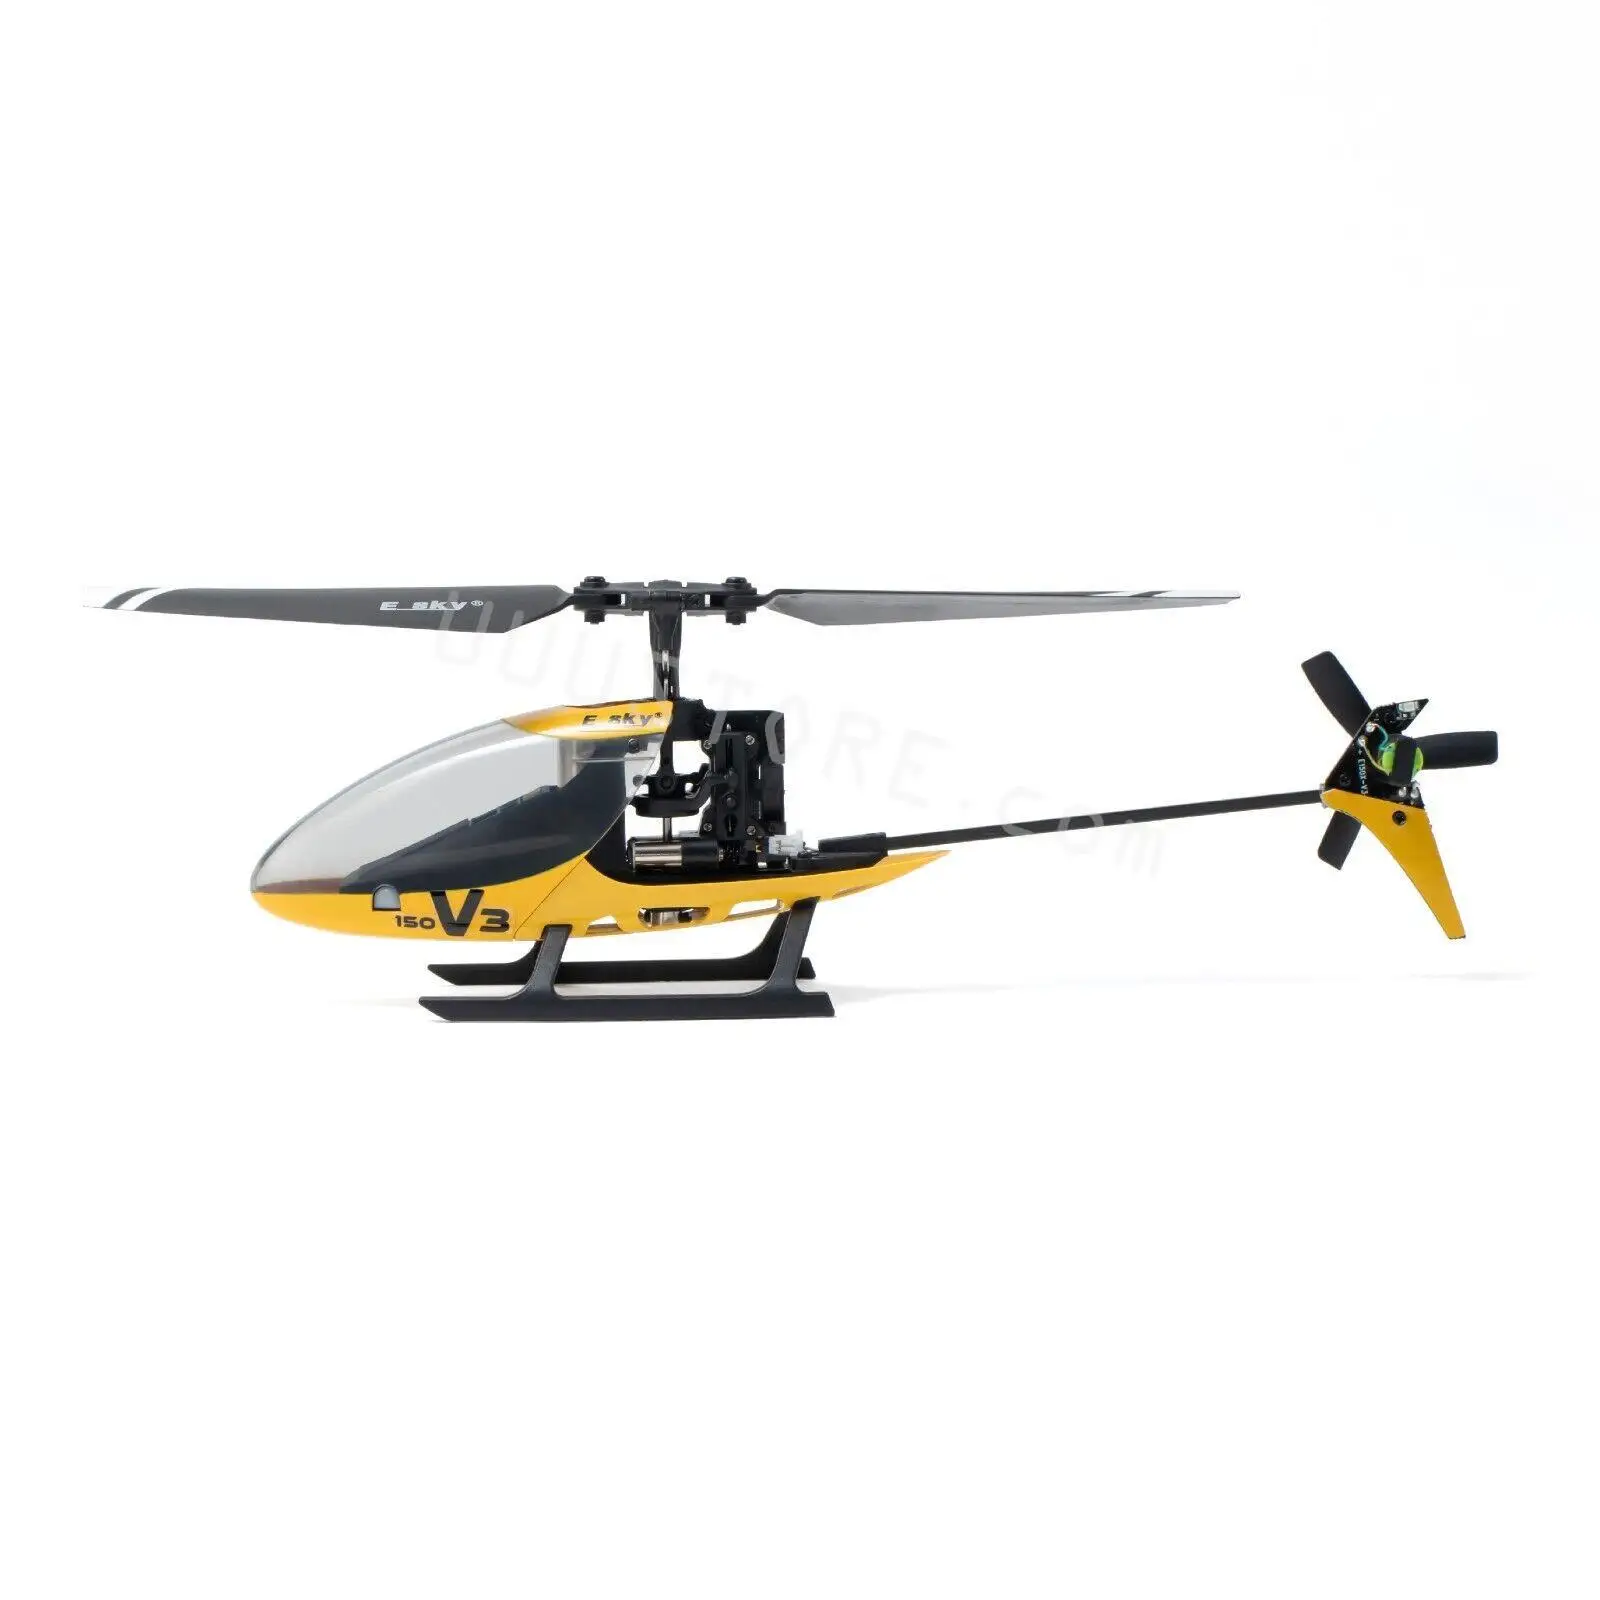 

ESKY 150 V3 2.4G 5CH Mini 6 Axes Gyro Flybarless RC Helicopter with CC3D Flight Controller For Children Outdoor Toy